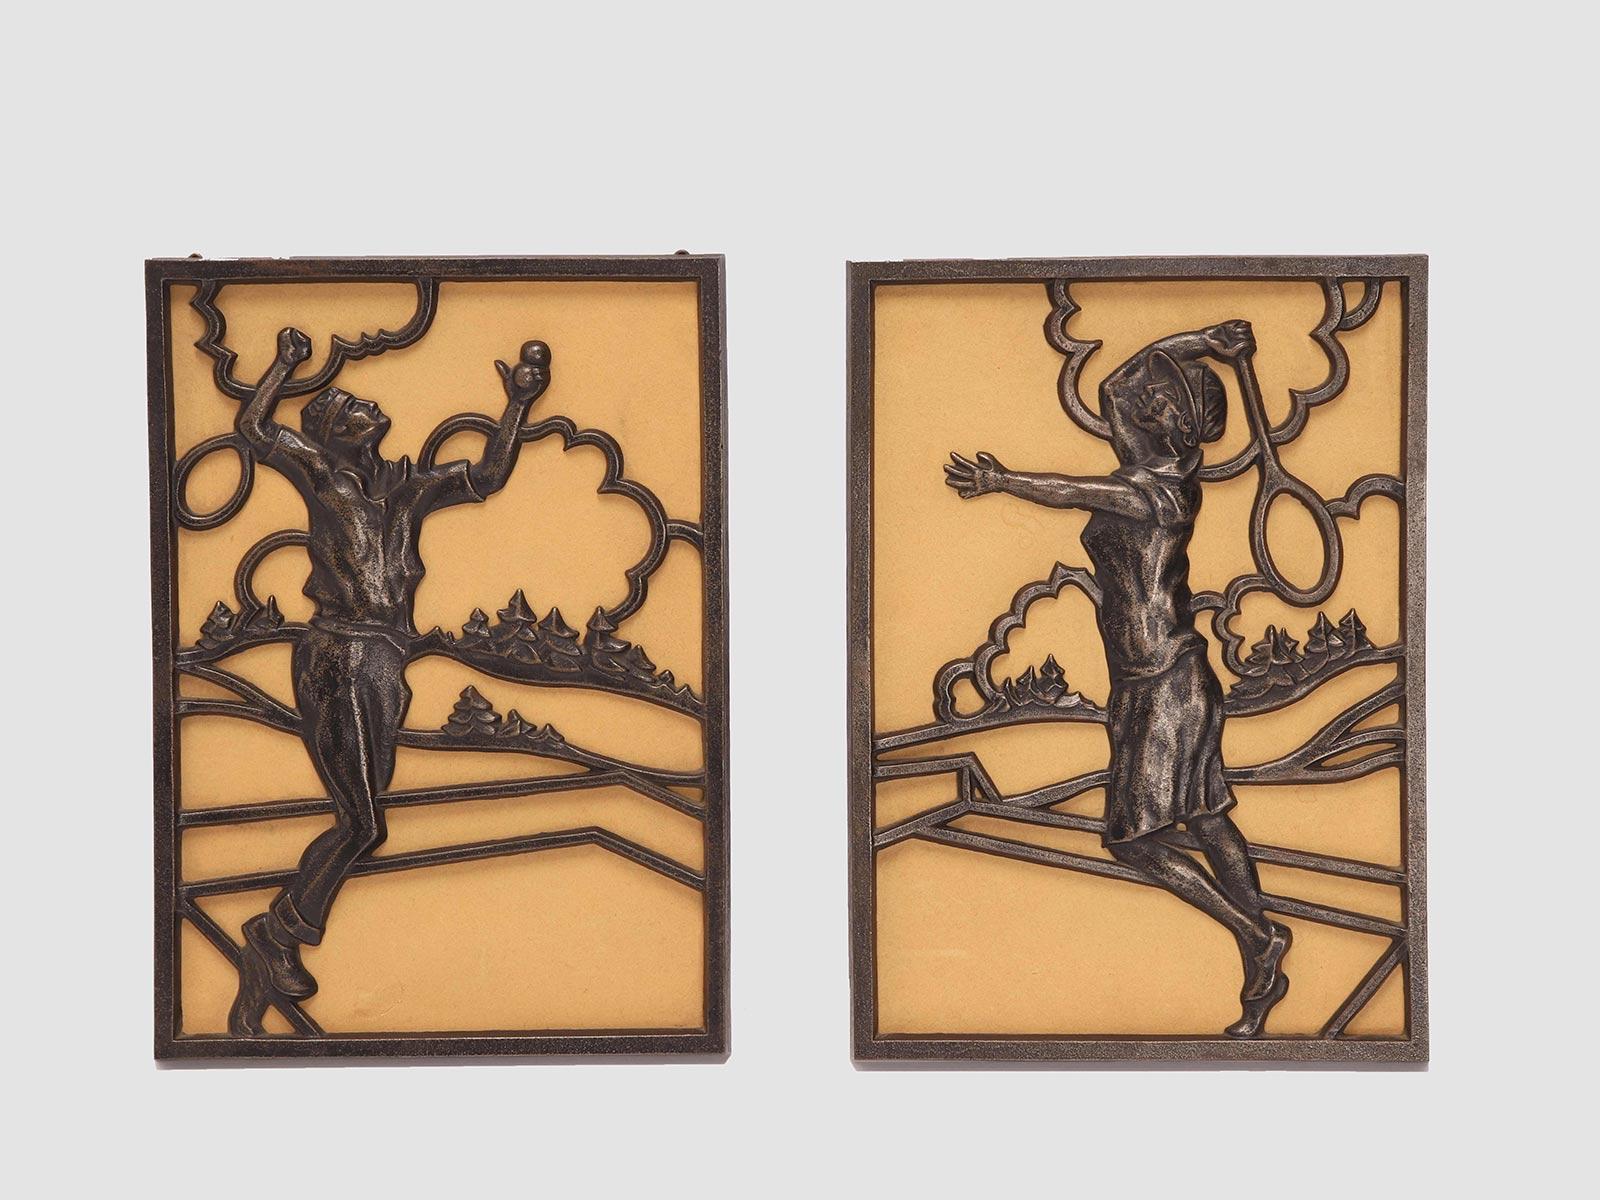 Pair of bronze plates, rectangular shape, openwork, depicting two tennis players, a man and a woman, with pine trees and clouds in the background. Austria circa 1930.